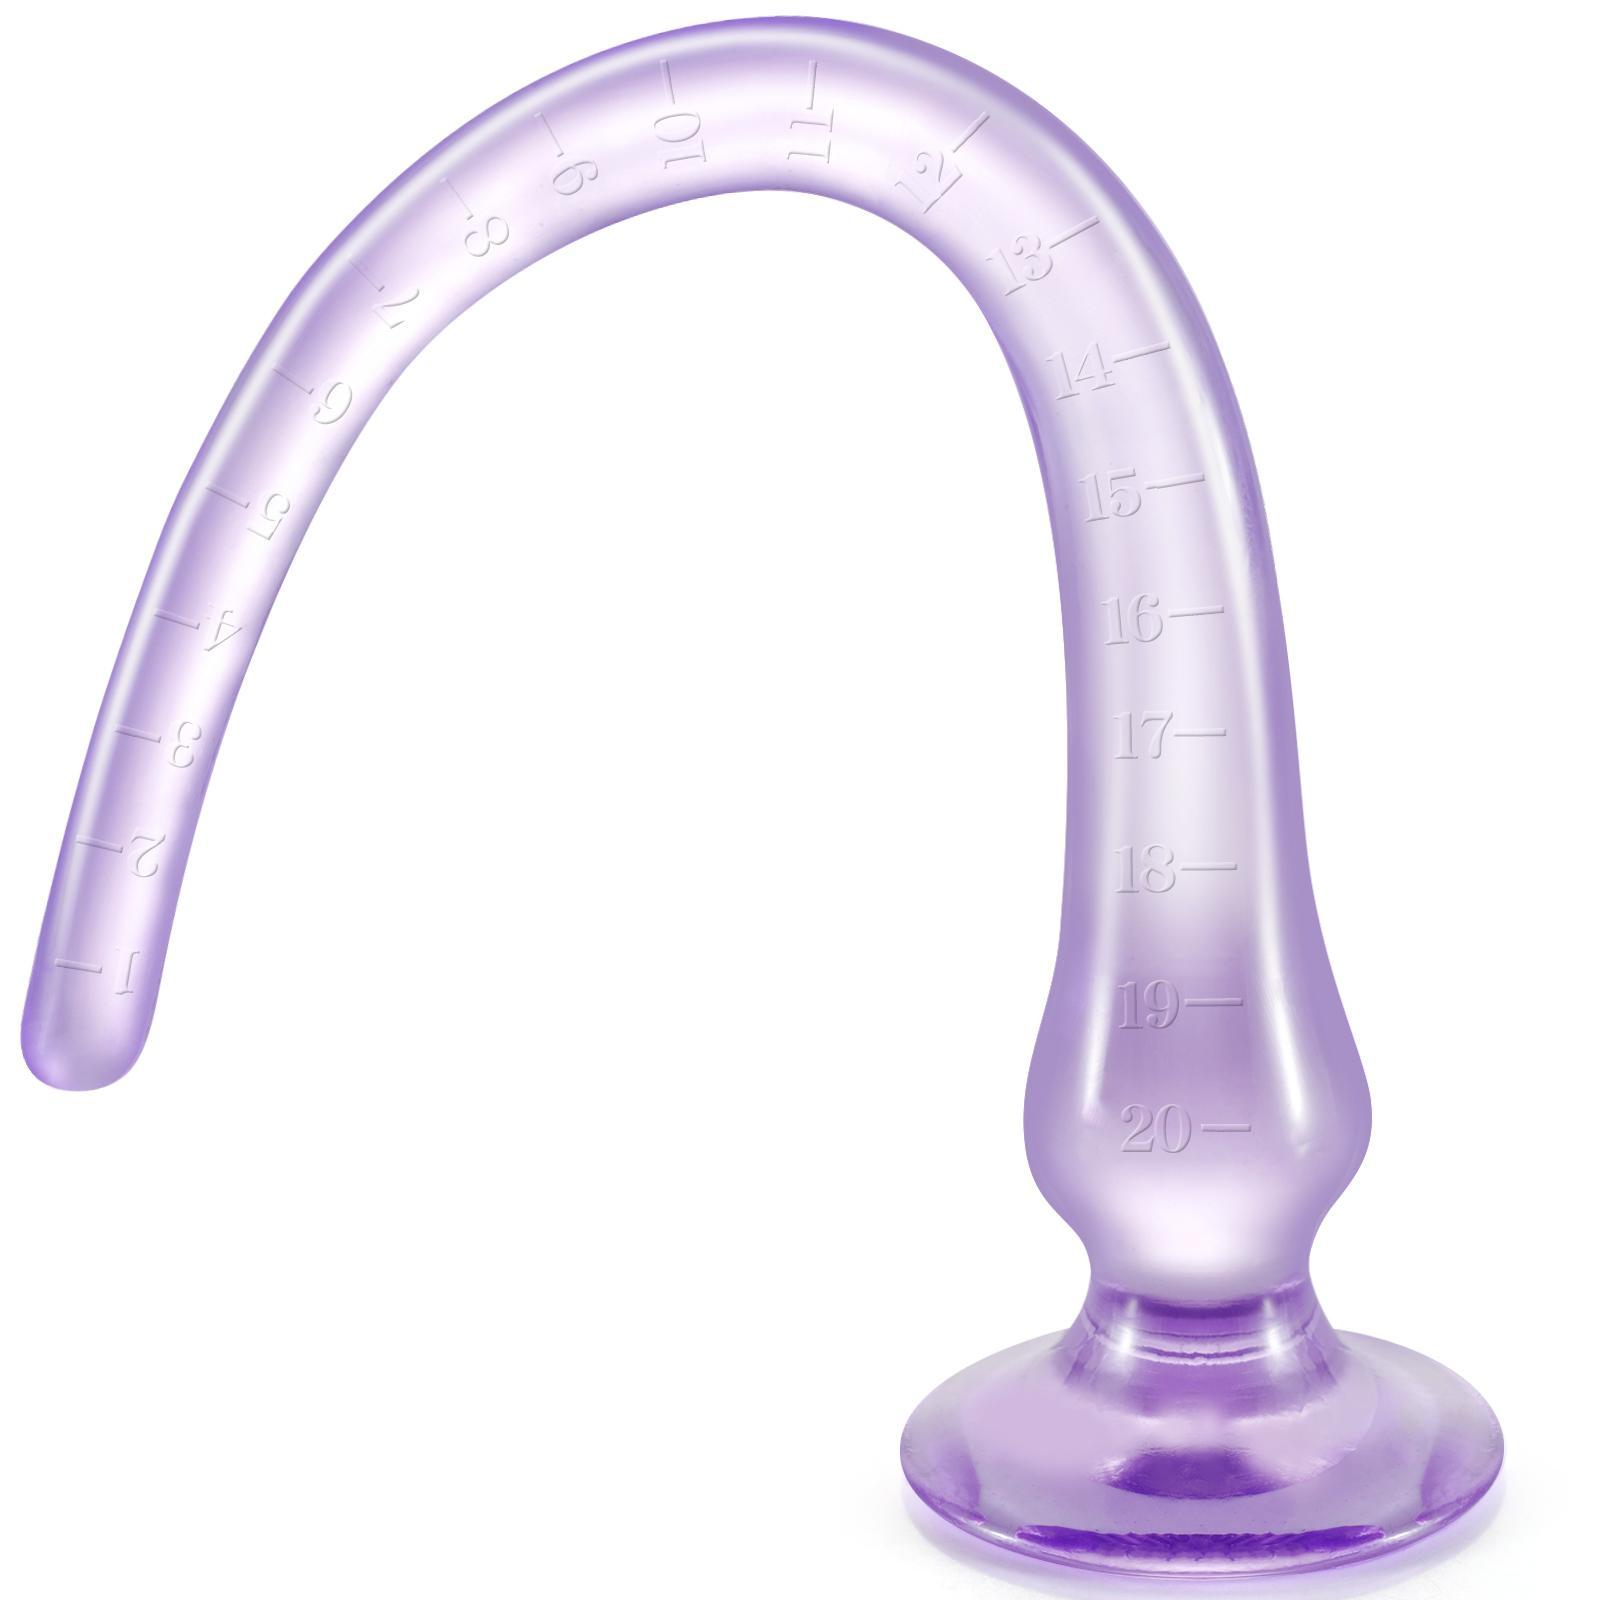 Super Long 12-24 Inch Graduated Stick Anal Dildo Strong Suction Cup Flexible Butt Plug Sex Toy For Women Men Gay Lesbian Couple